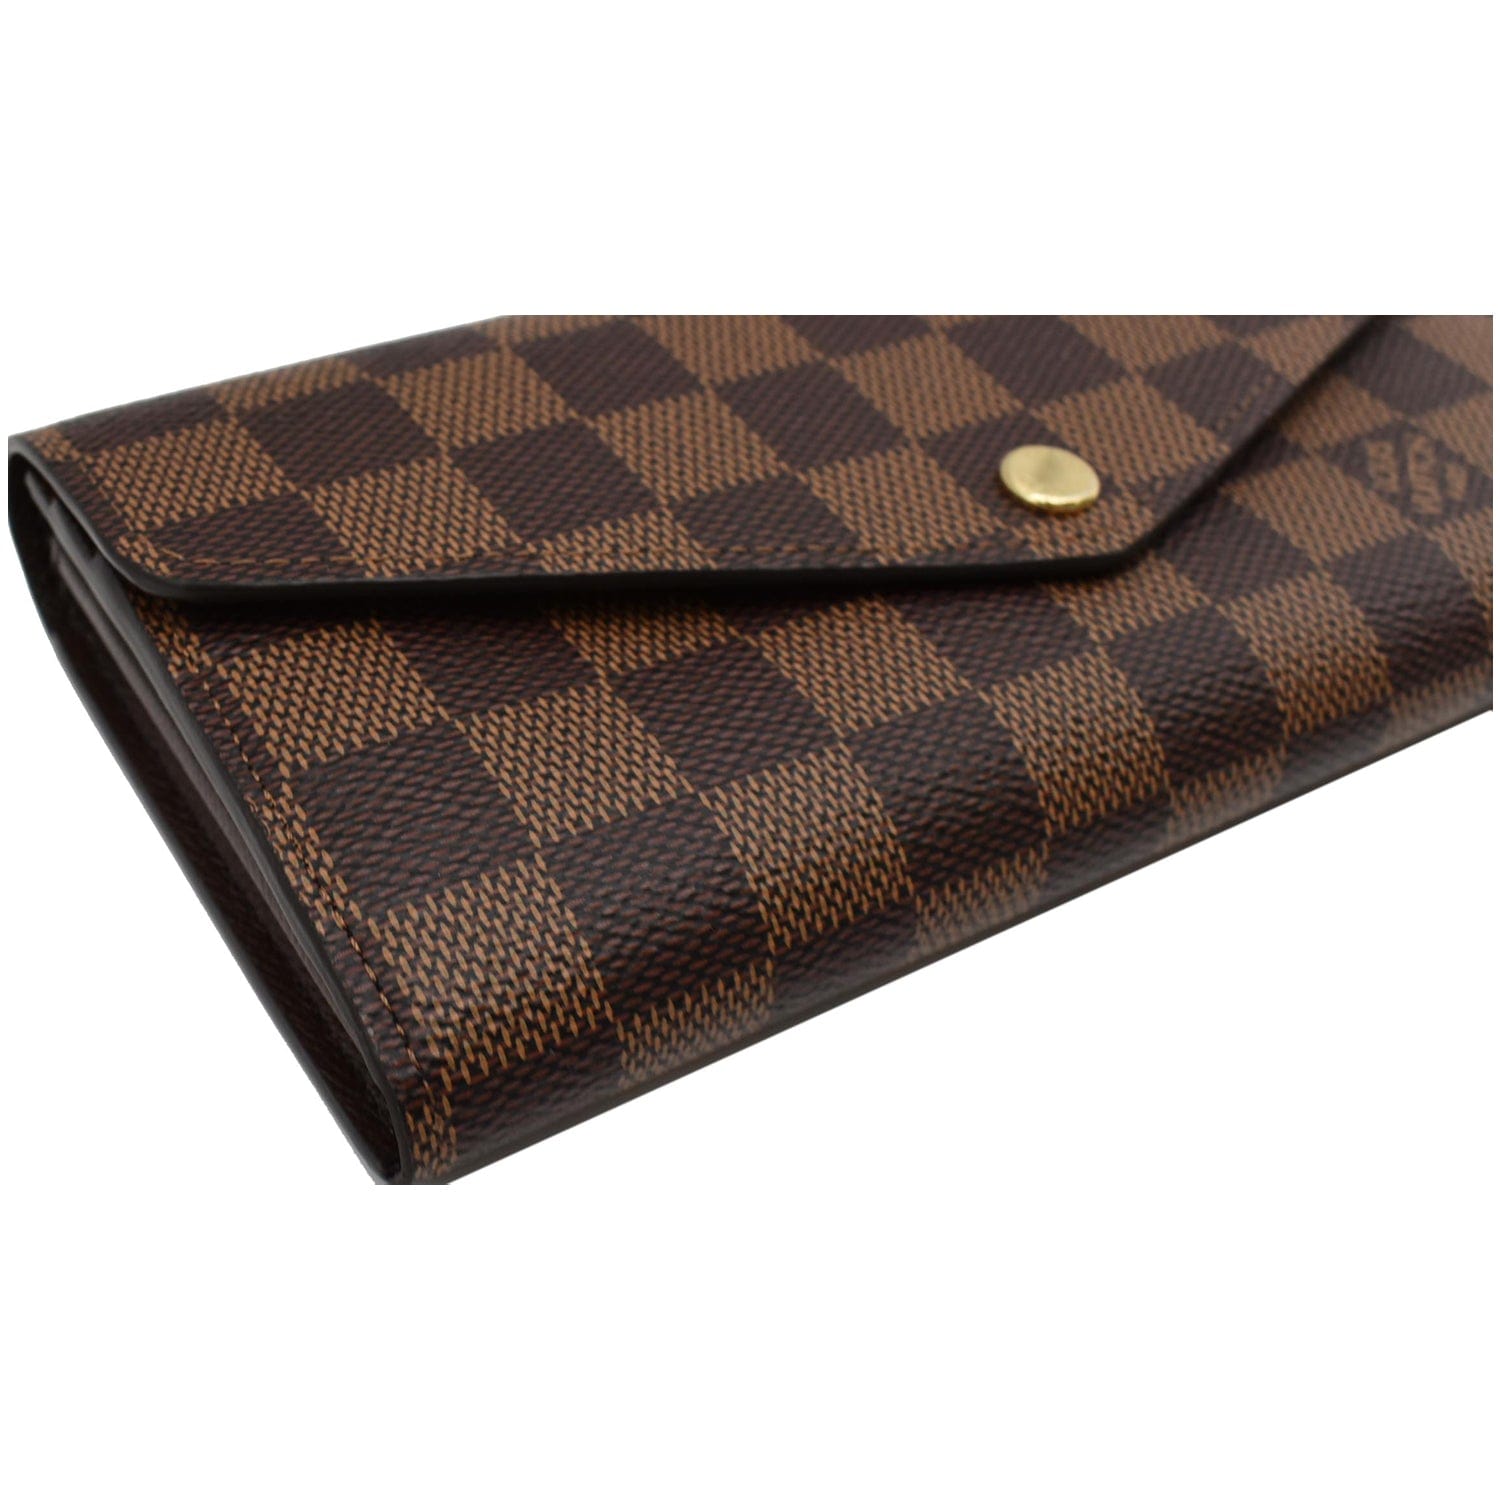 LV Portefeuille Sarah Wallet Damier Ebene Coated Canvas with Leather and  Gold Hardware #OKYS-5 – Luxuy Vintage